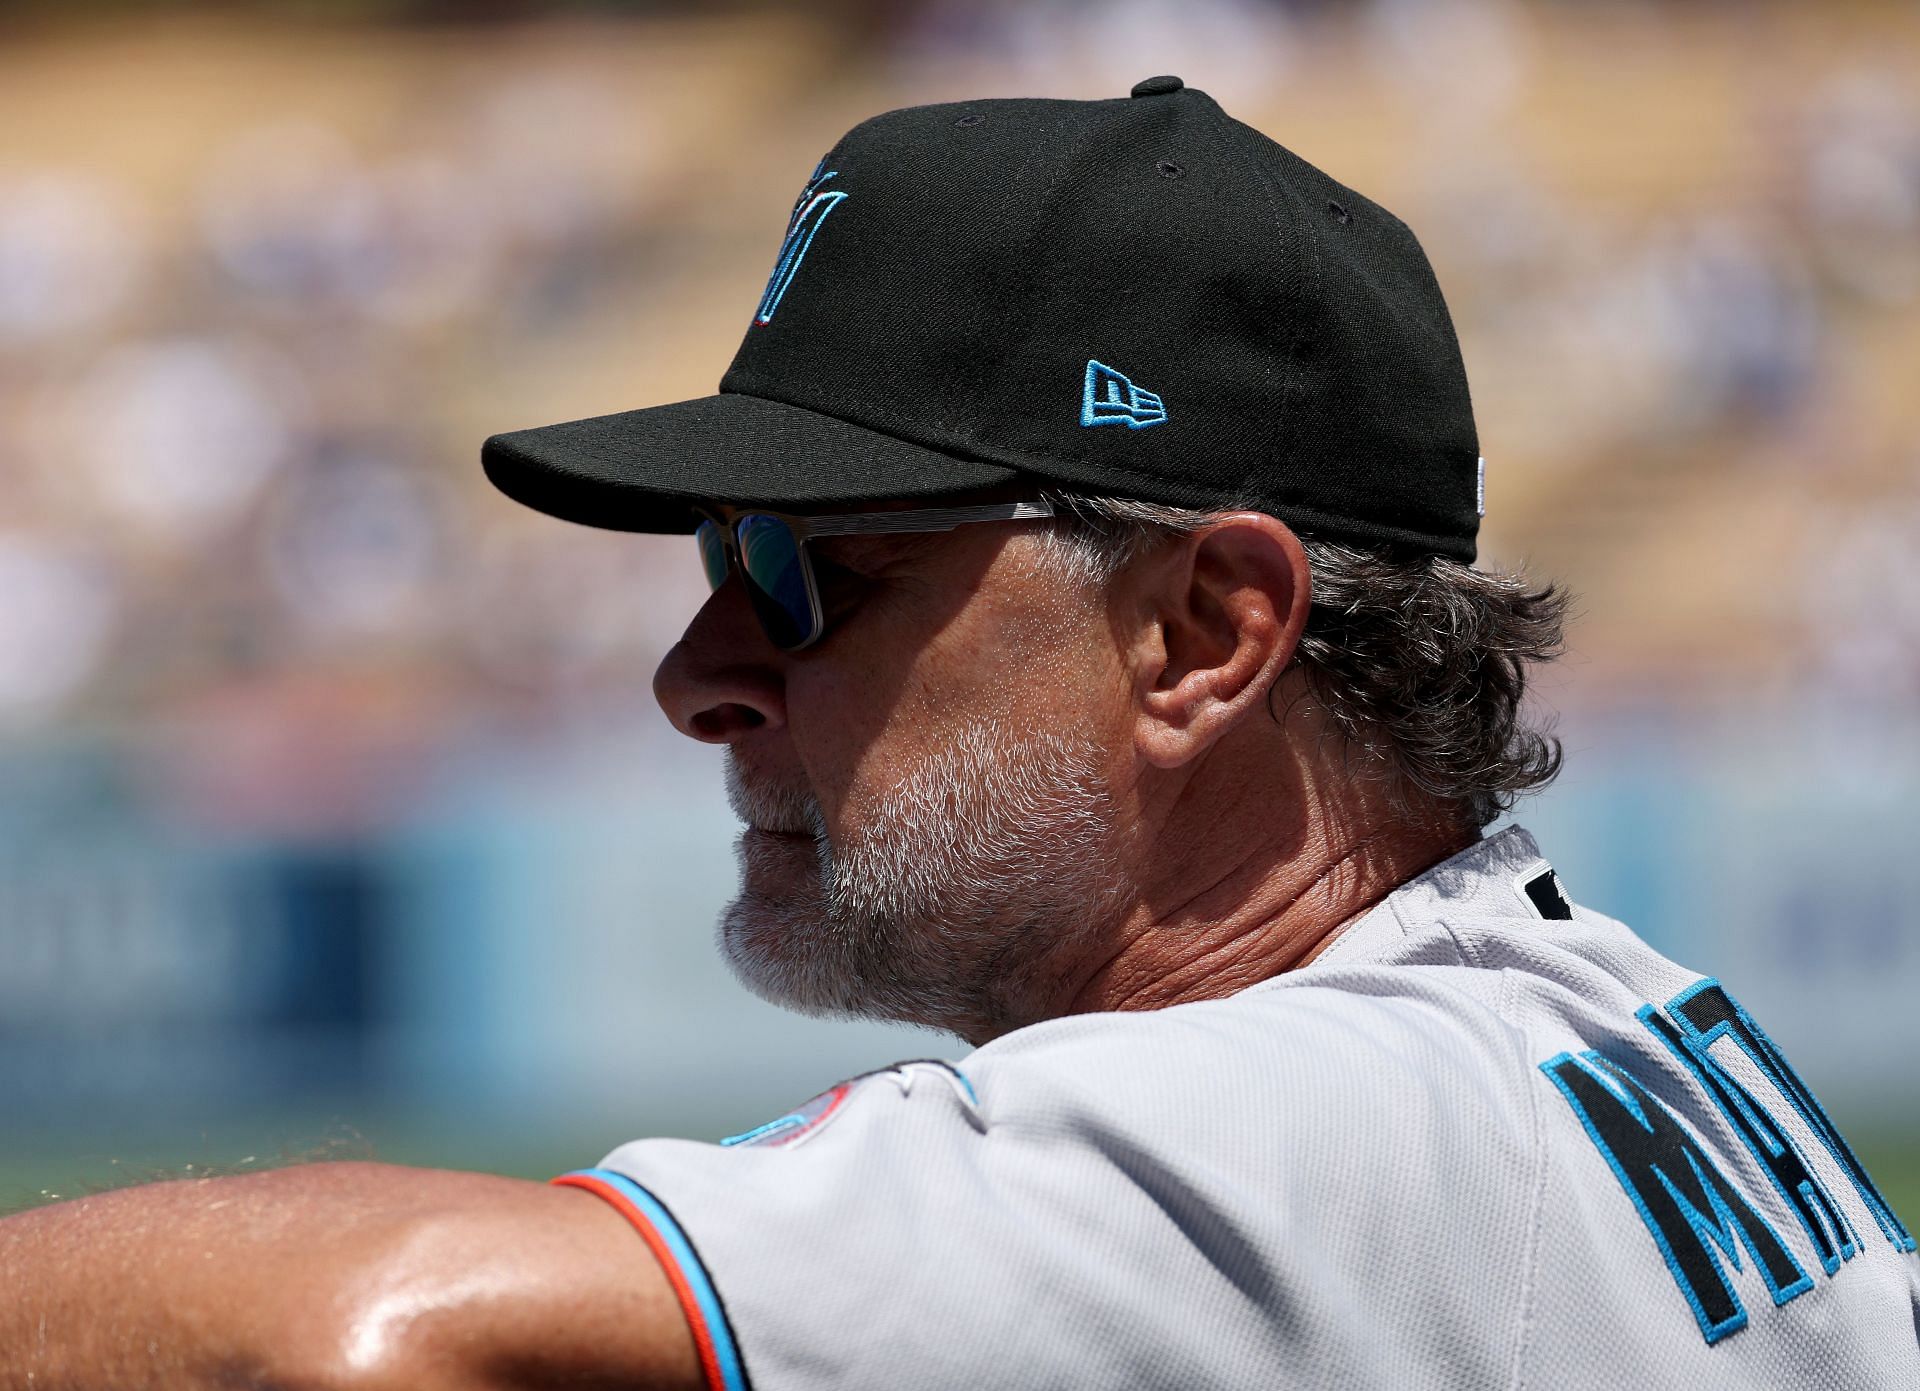 Should the Miami Marlins fire Don Mattingly?